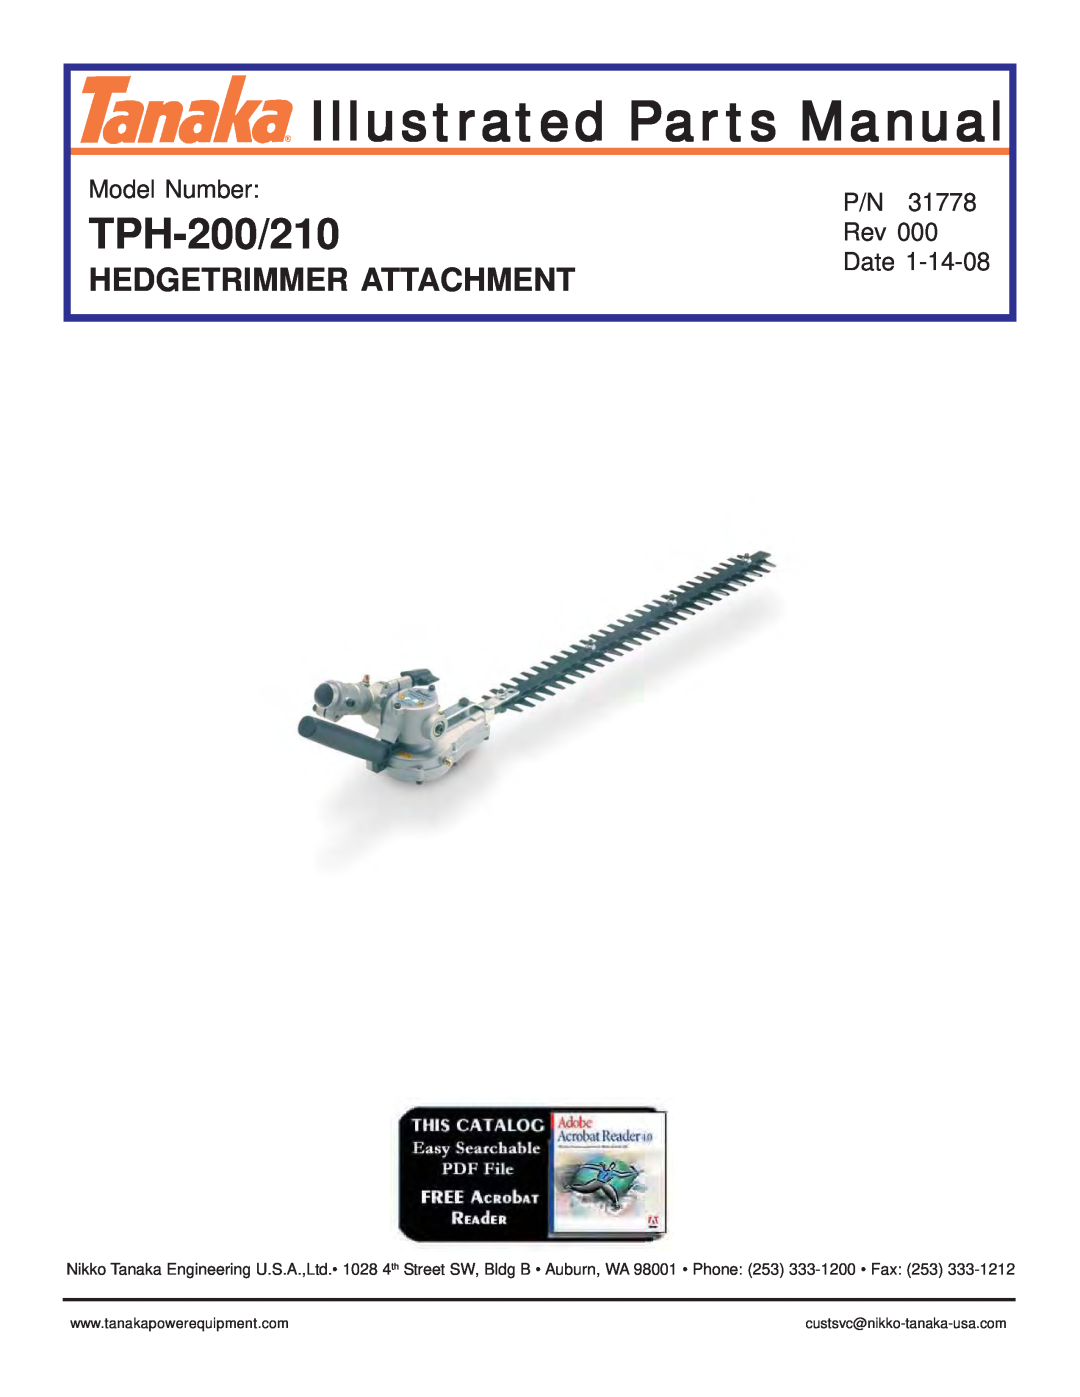 Tanaka TPH-210/200 manual Hedgetrimmer Attachment, Model Number, Illustrated Parts Manual, TPH-200/210, Date 